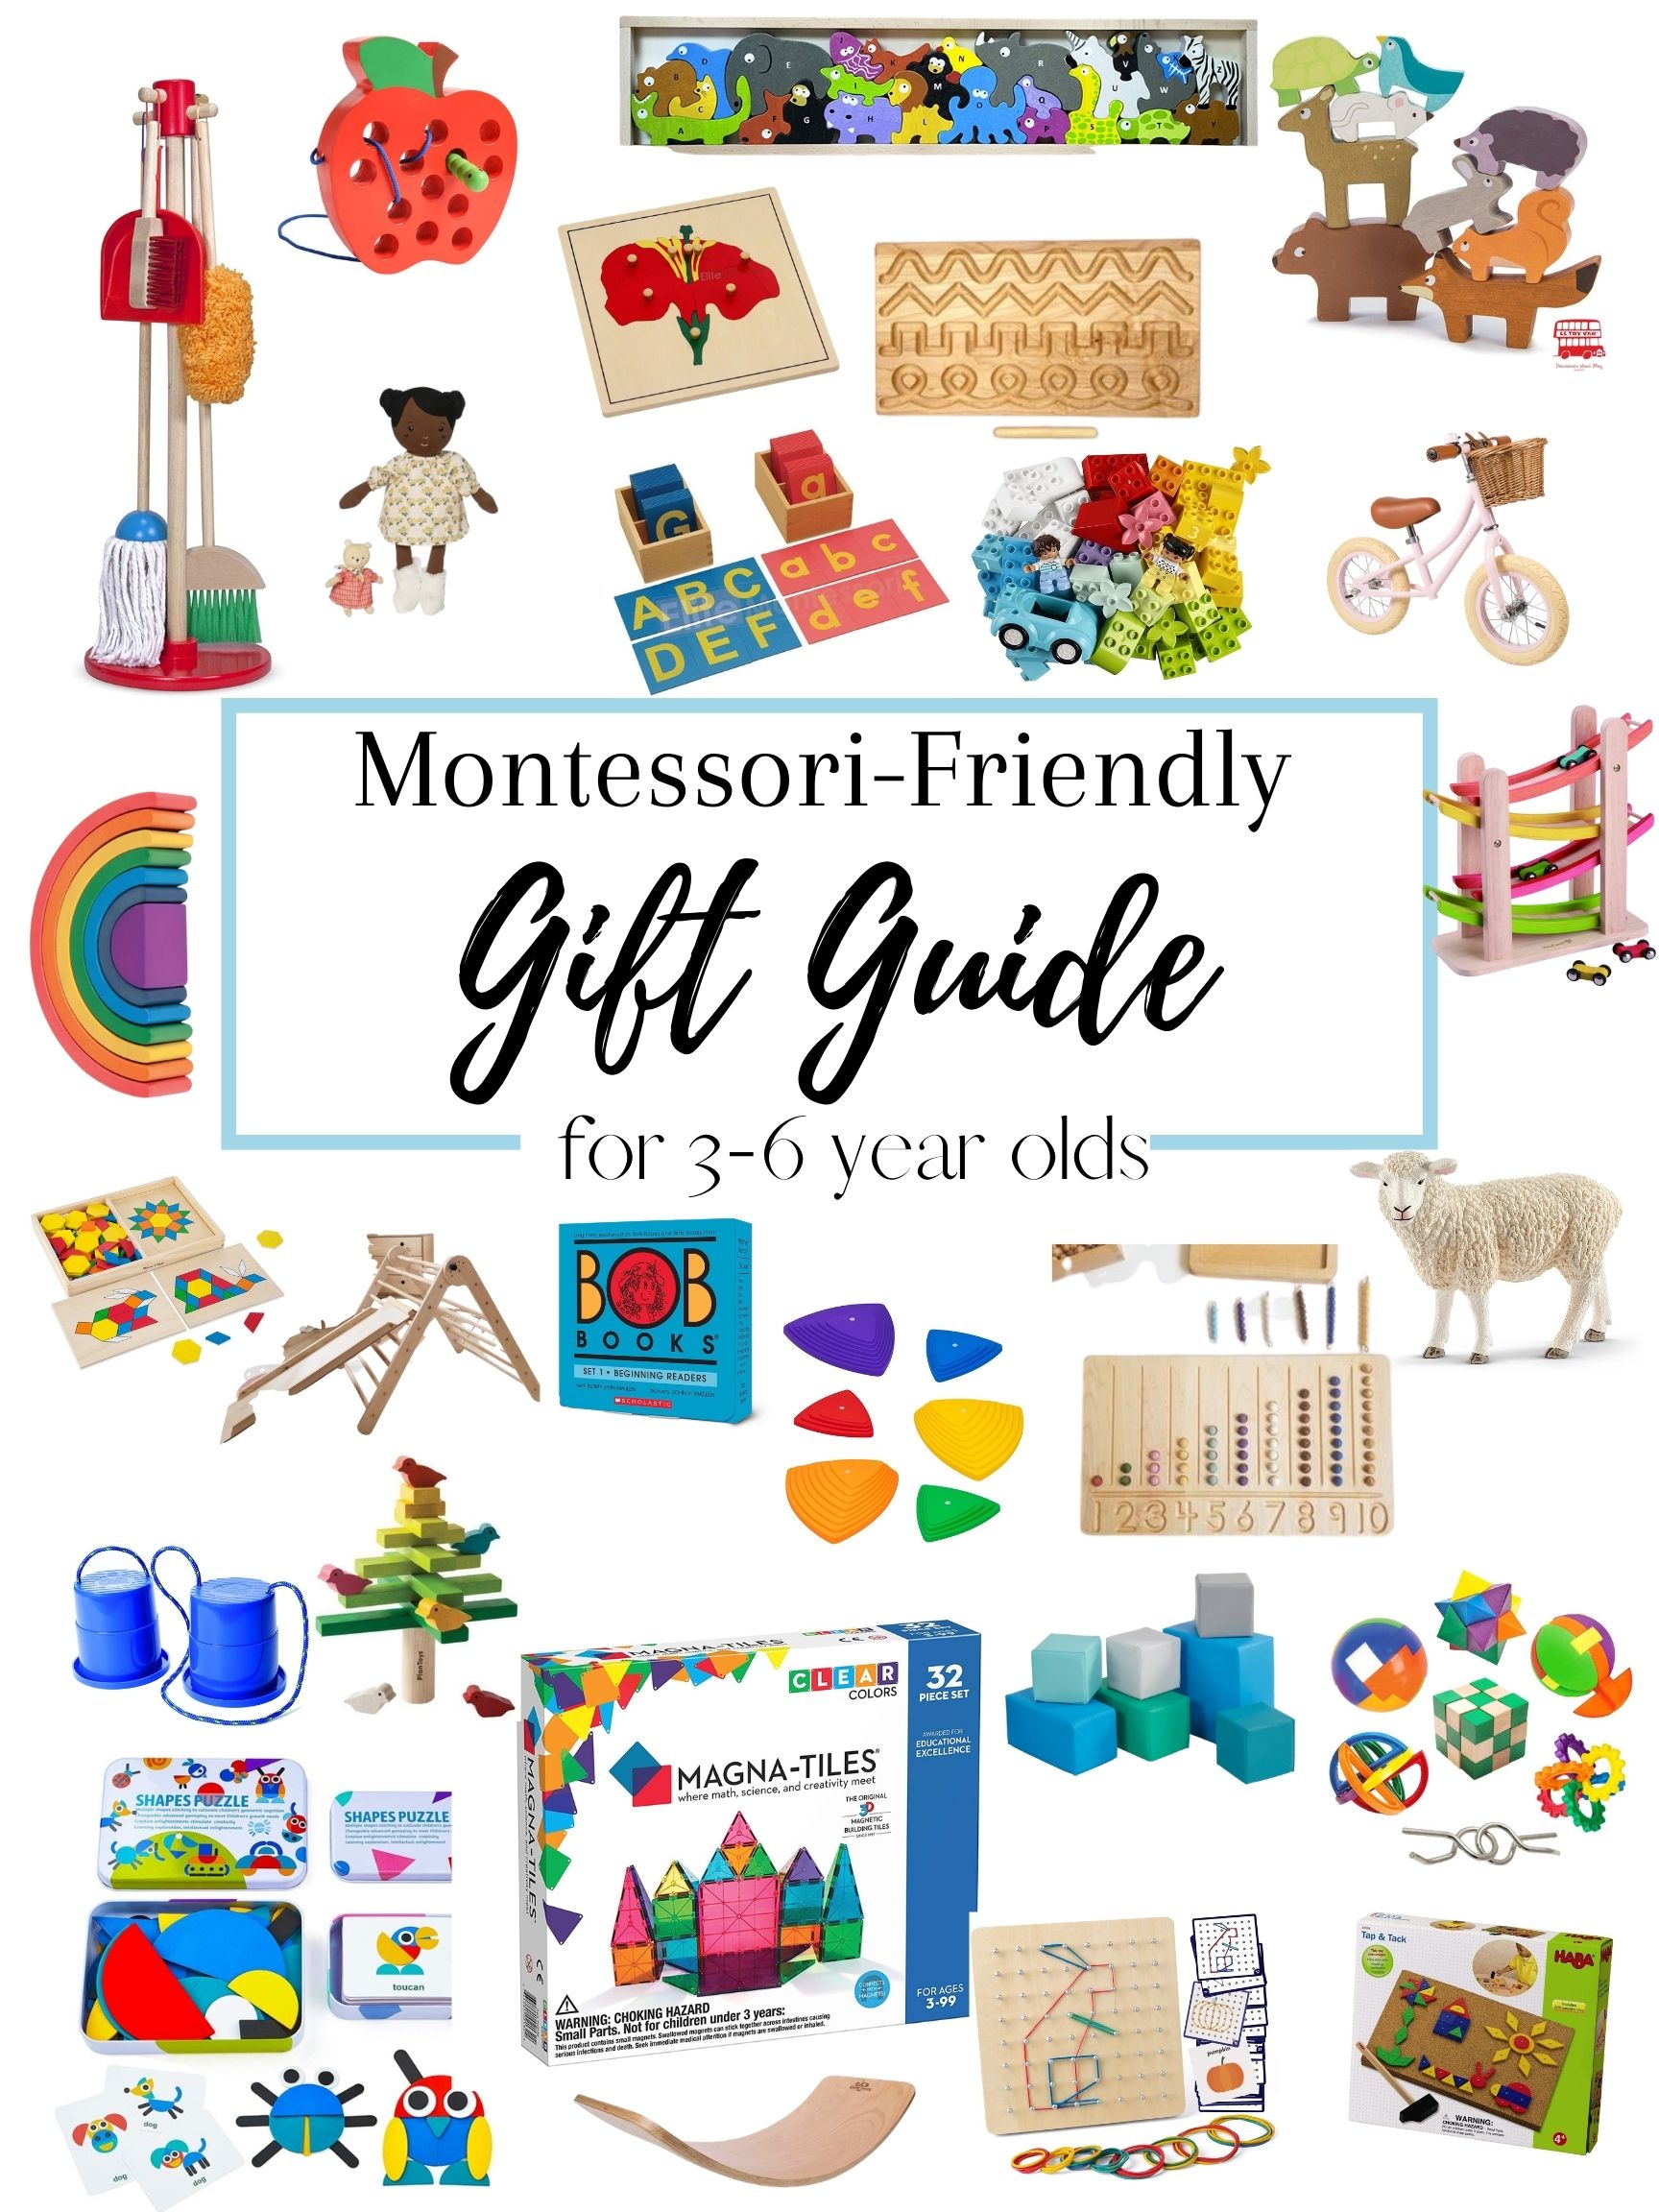 Montessori-Friendly Toys for Children ages 3-6 years old